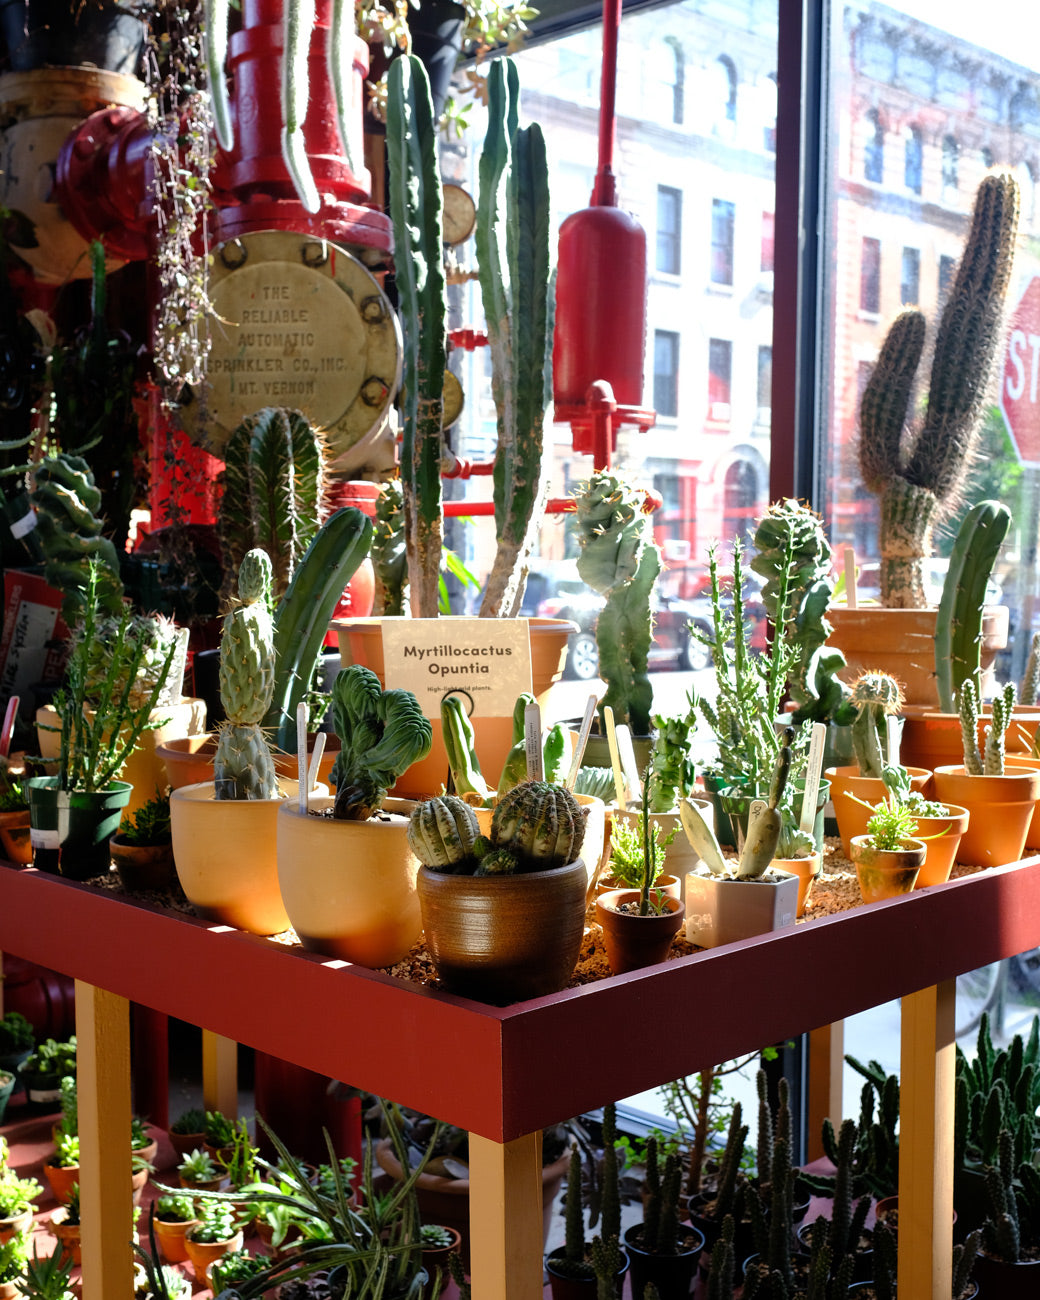 Cacti like Myrtillocactus and Echinocereus at Tula Plants & Design receive direct sun on a hot August day in Brooklyn.